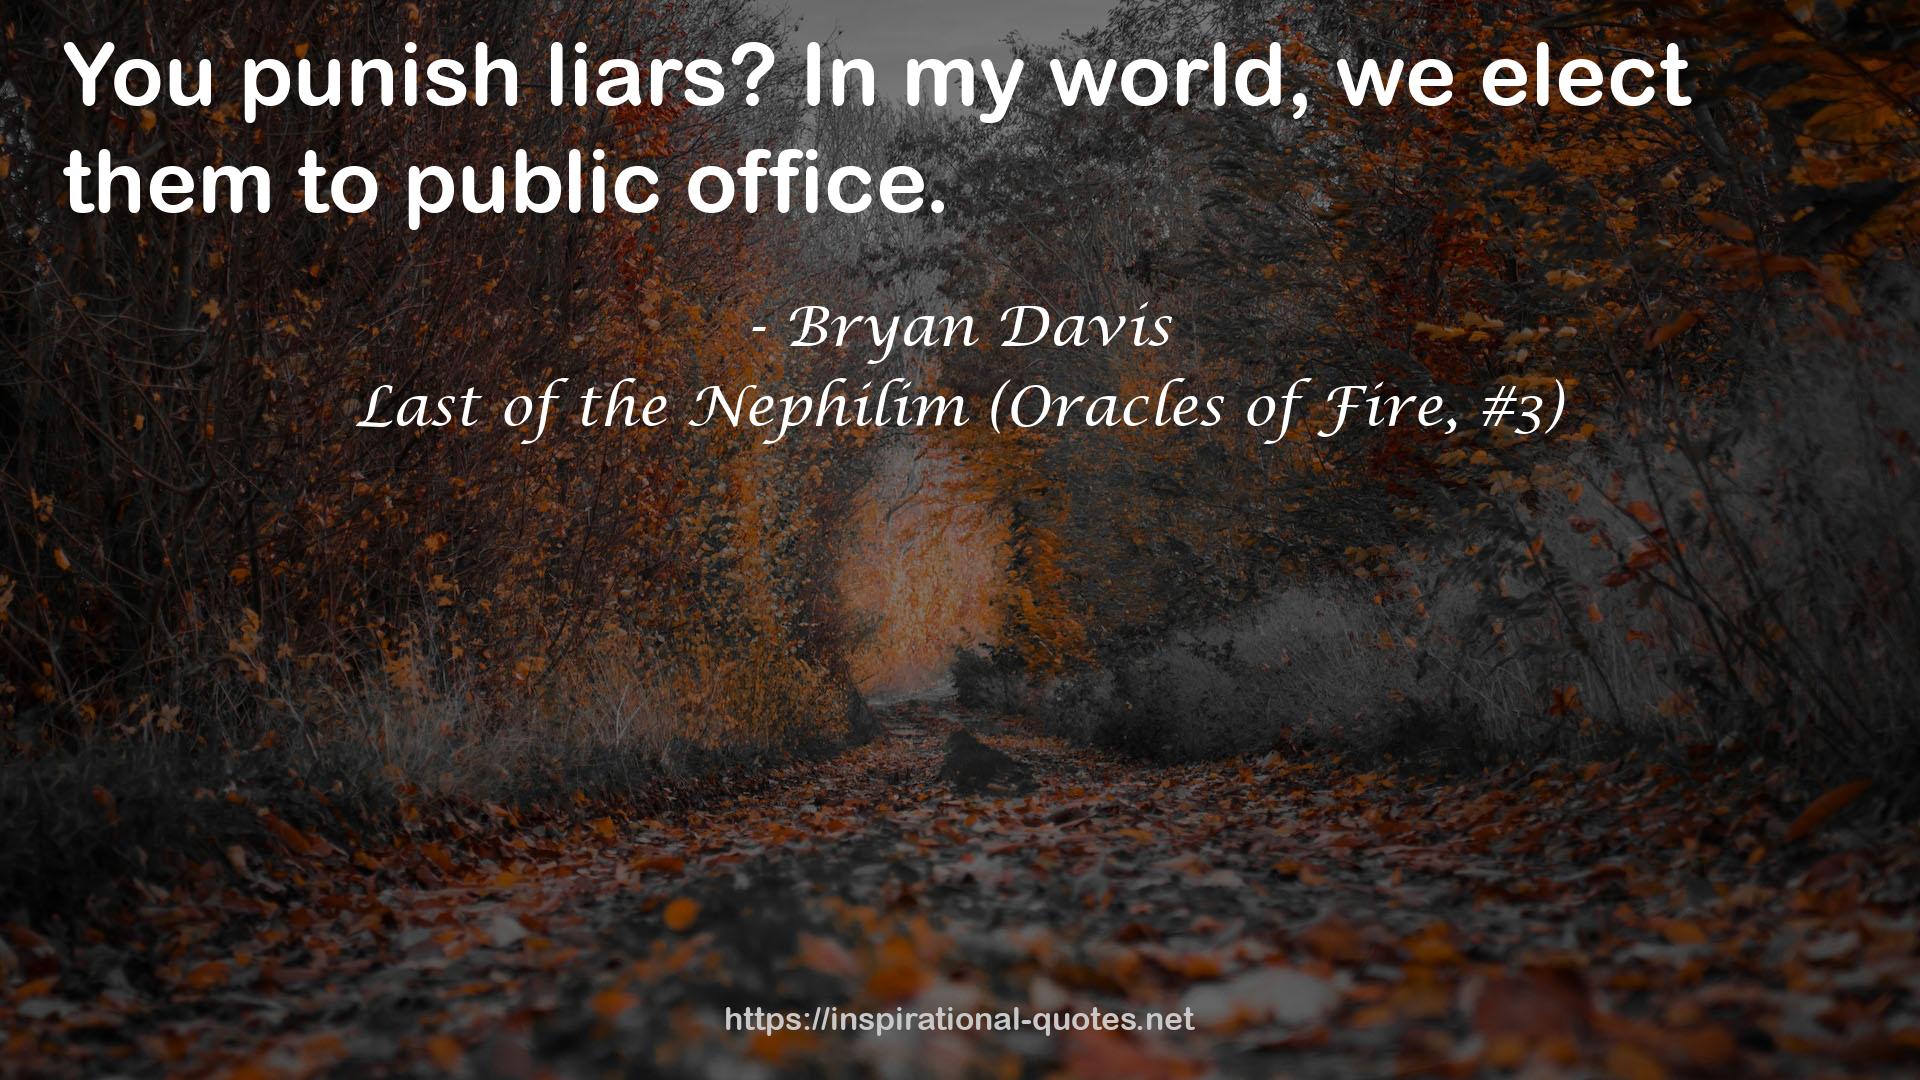 Last of the Nephilim (Oracles of Fire, #3) QUOTES